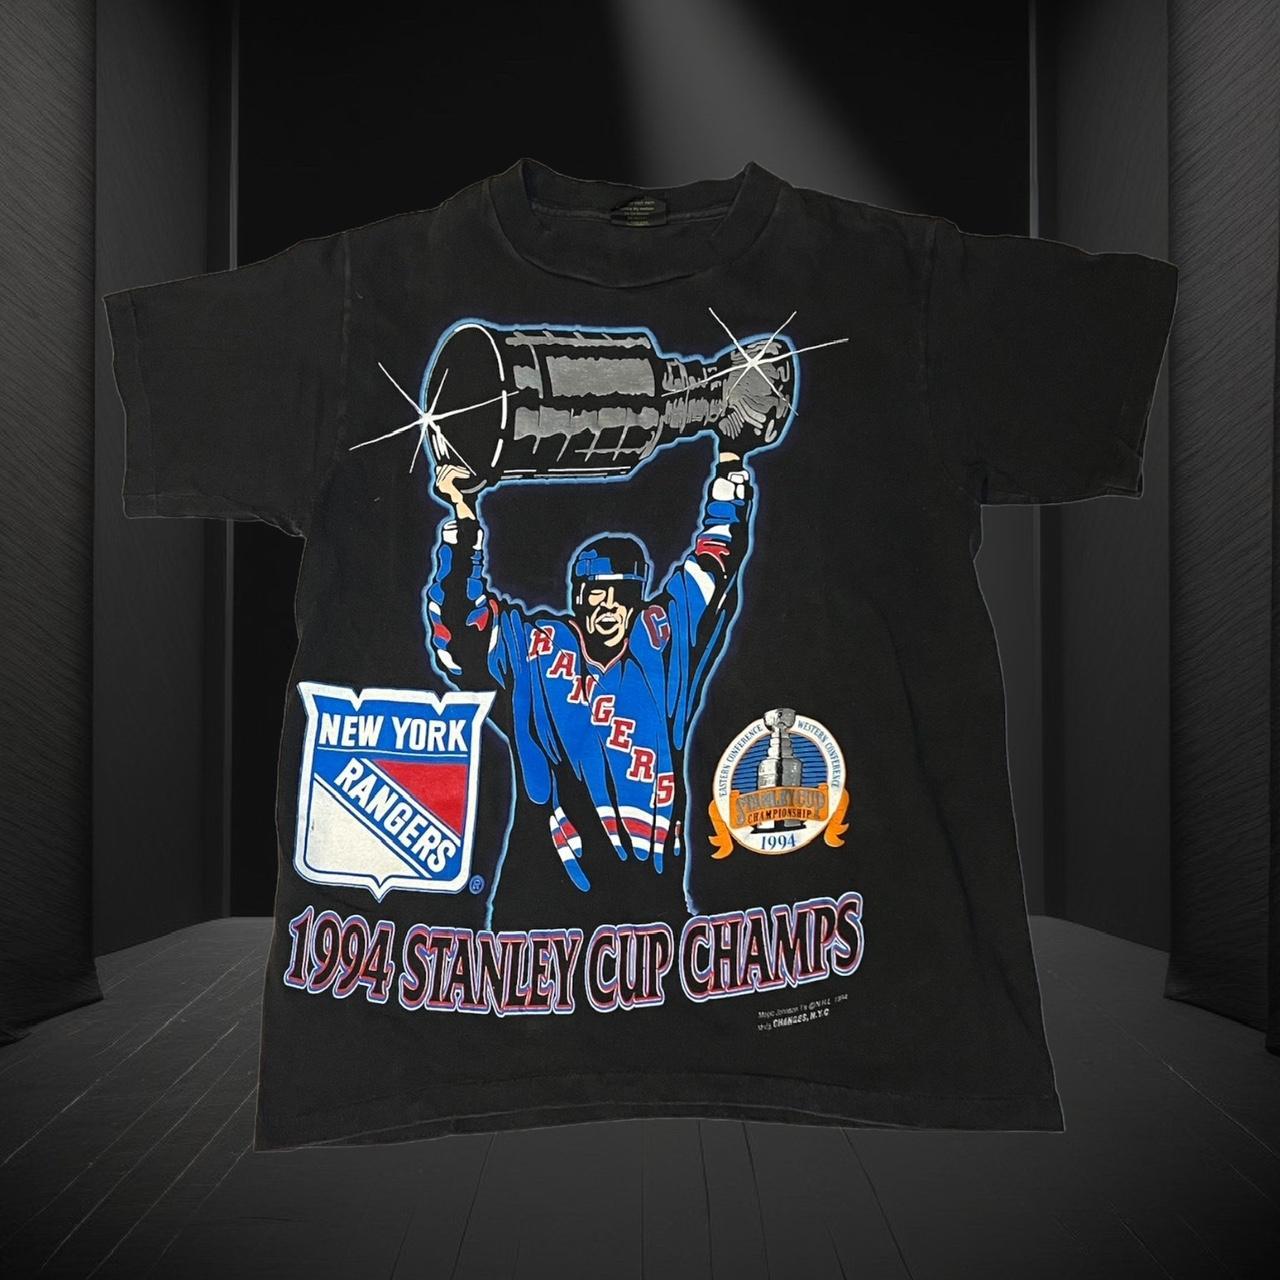 Vintage 90s 1994 NHL Stanley Cup Champion New York Rangers 